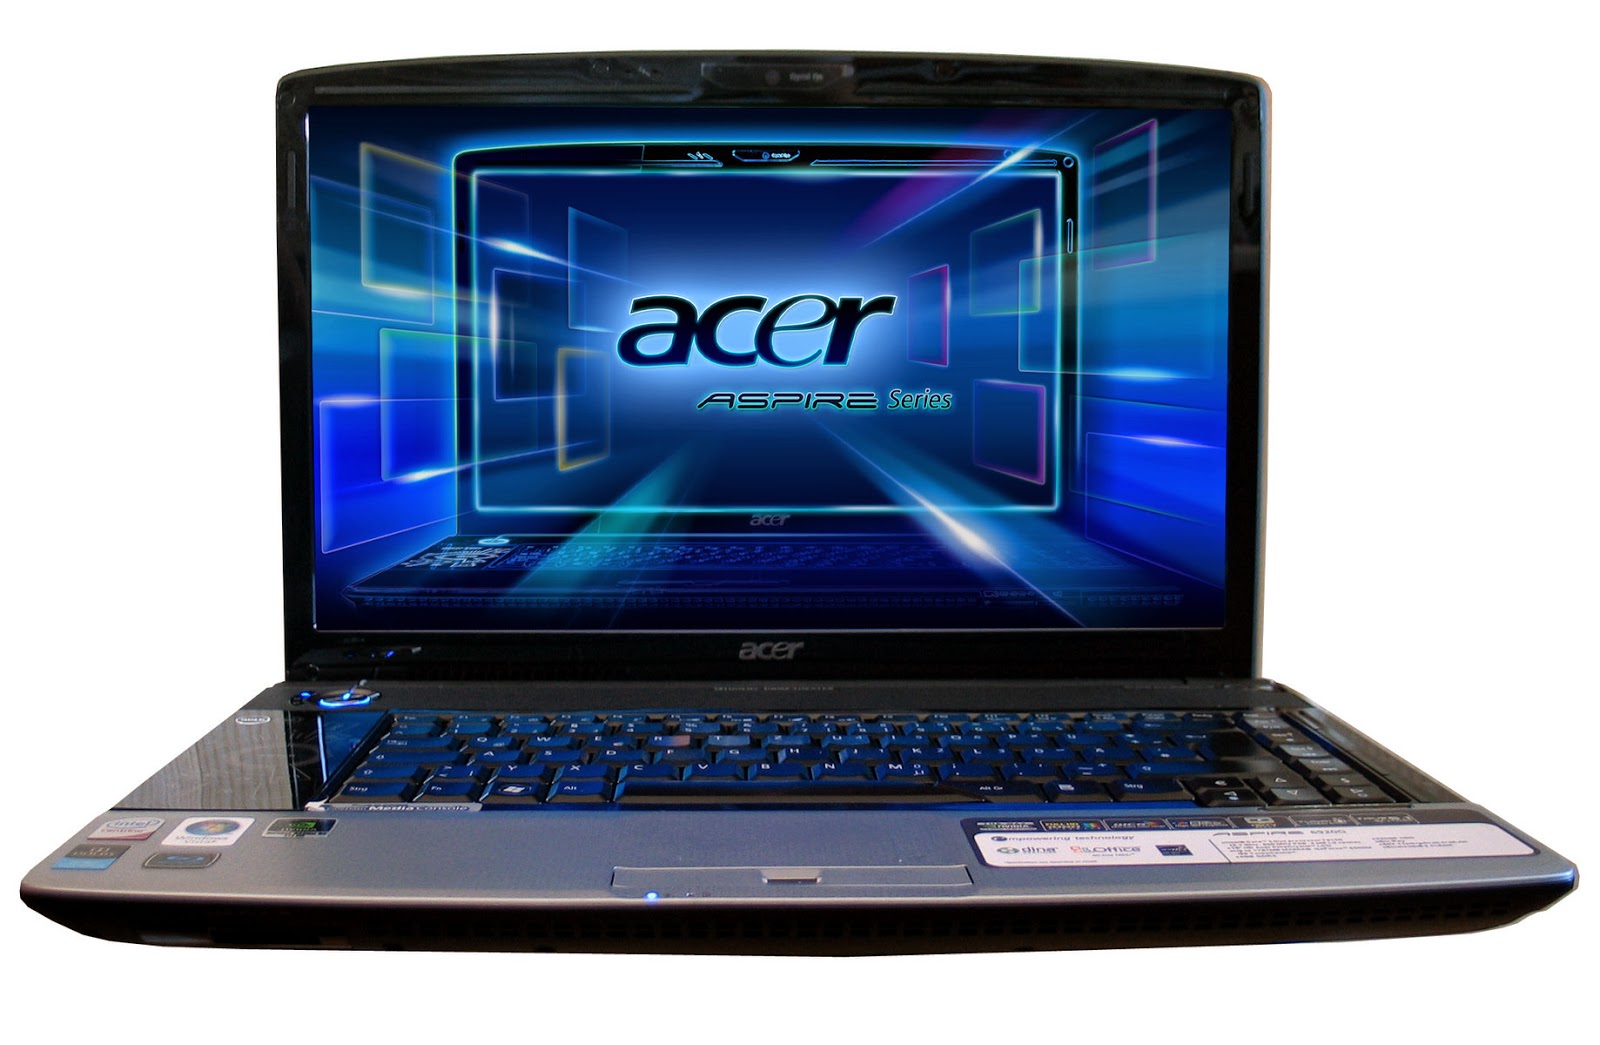 acer aspire 5580 drivers for windows 7 download